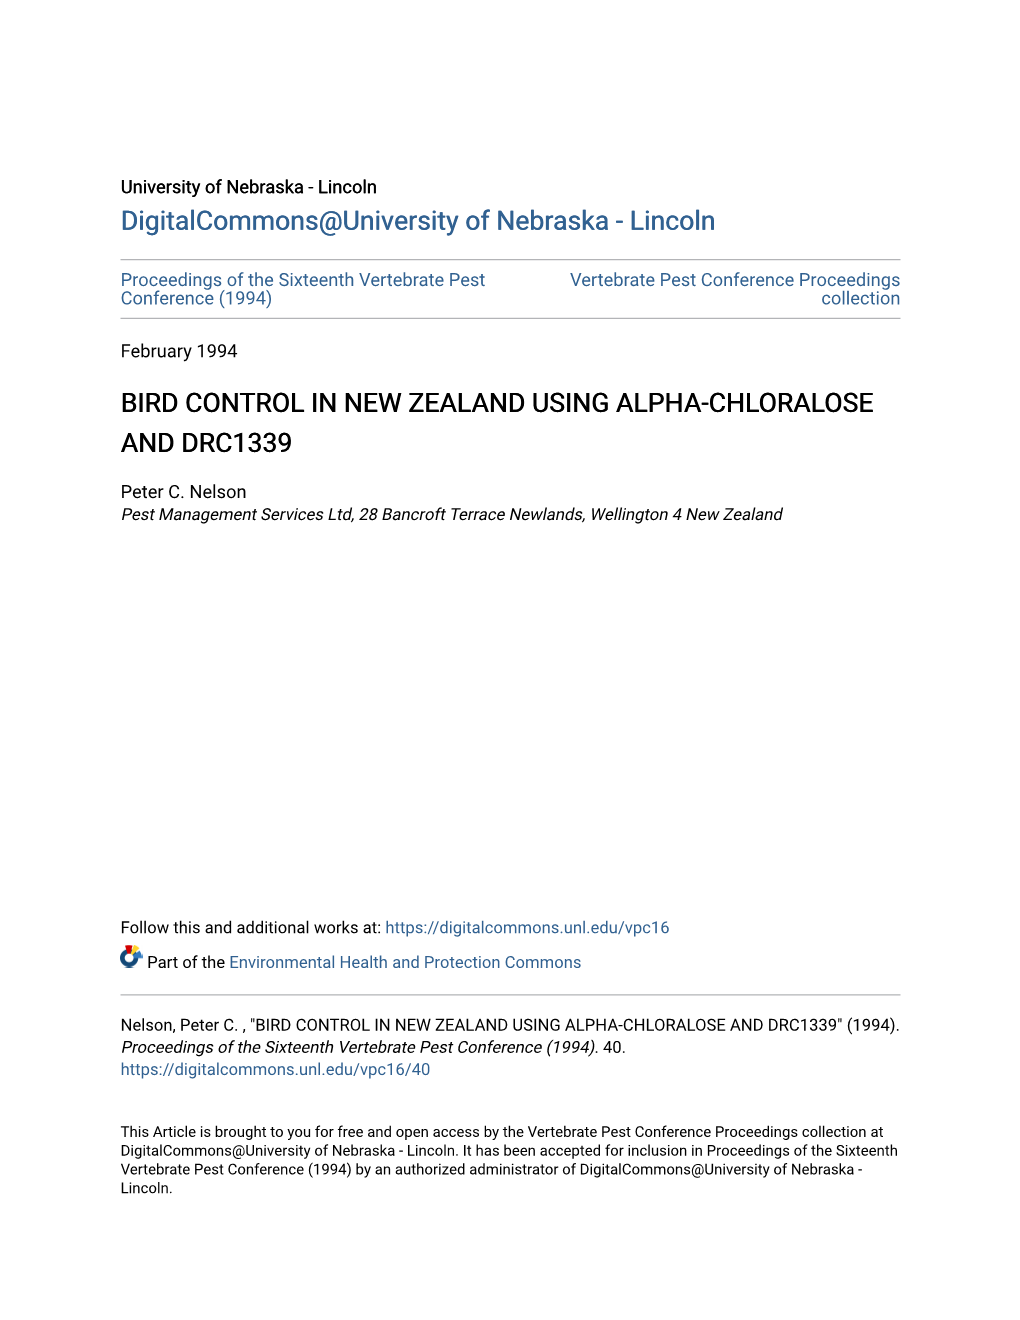 Bird Control in New Zealand Using Alpha-Chloralose and Drc1339